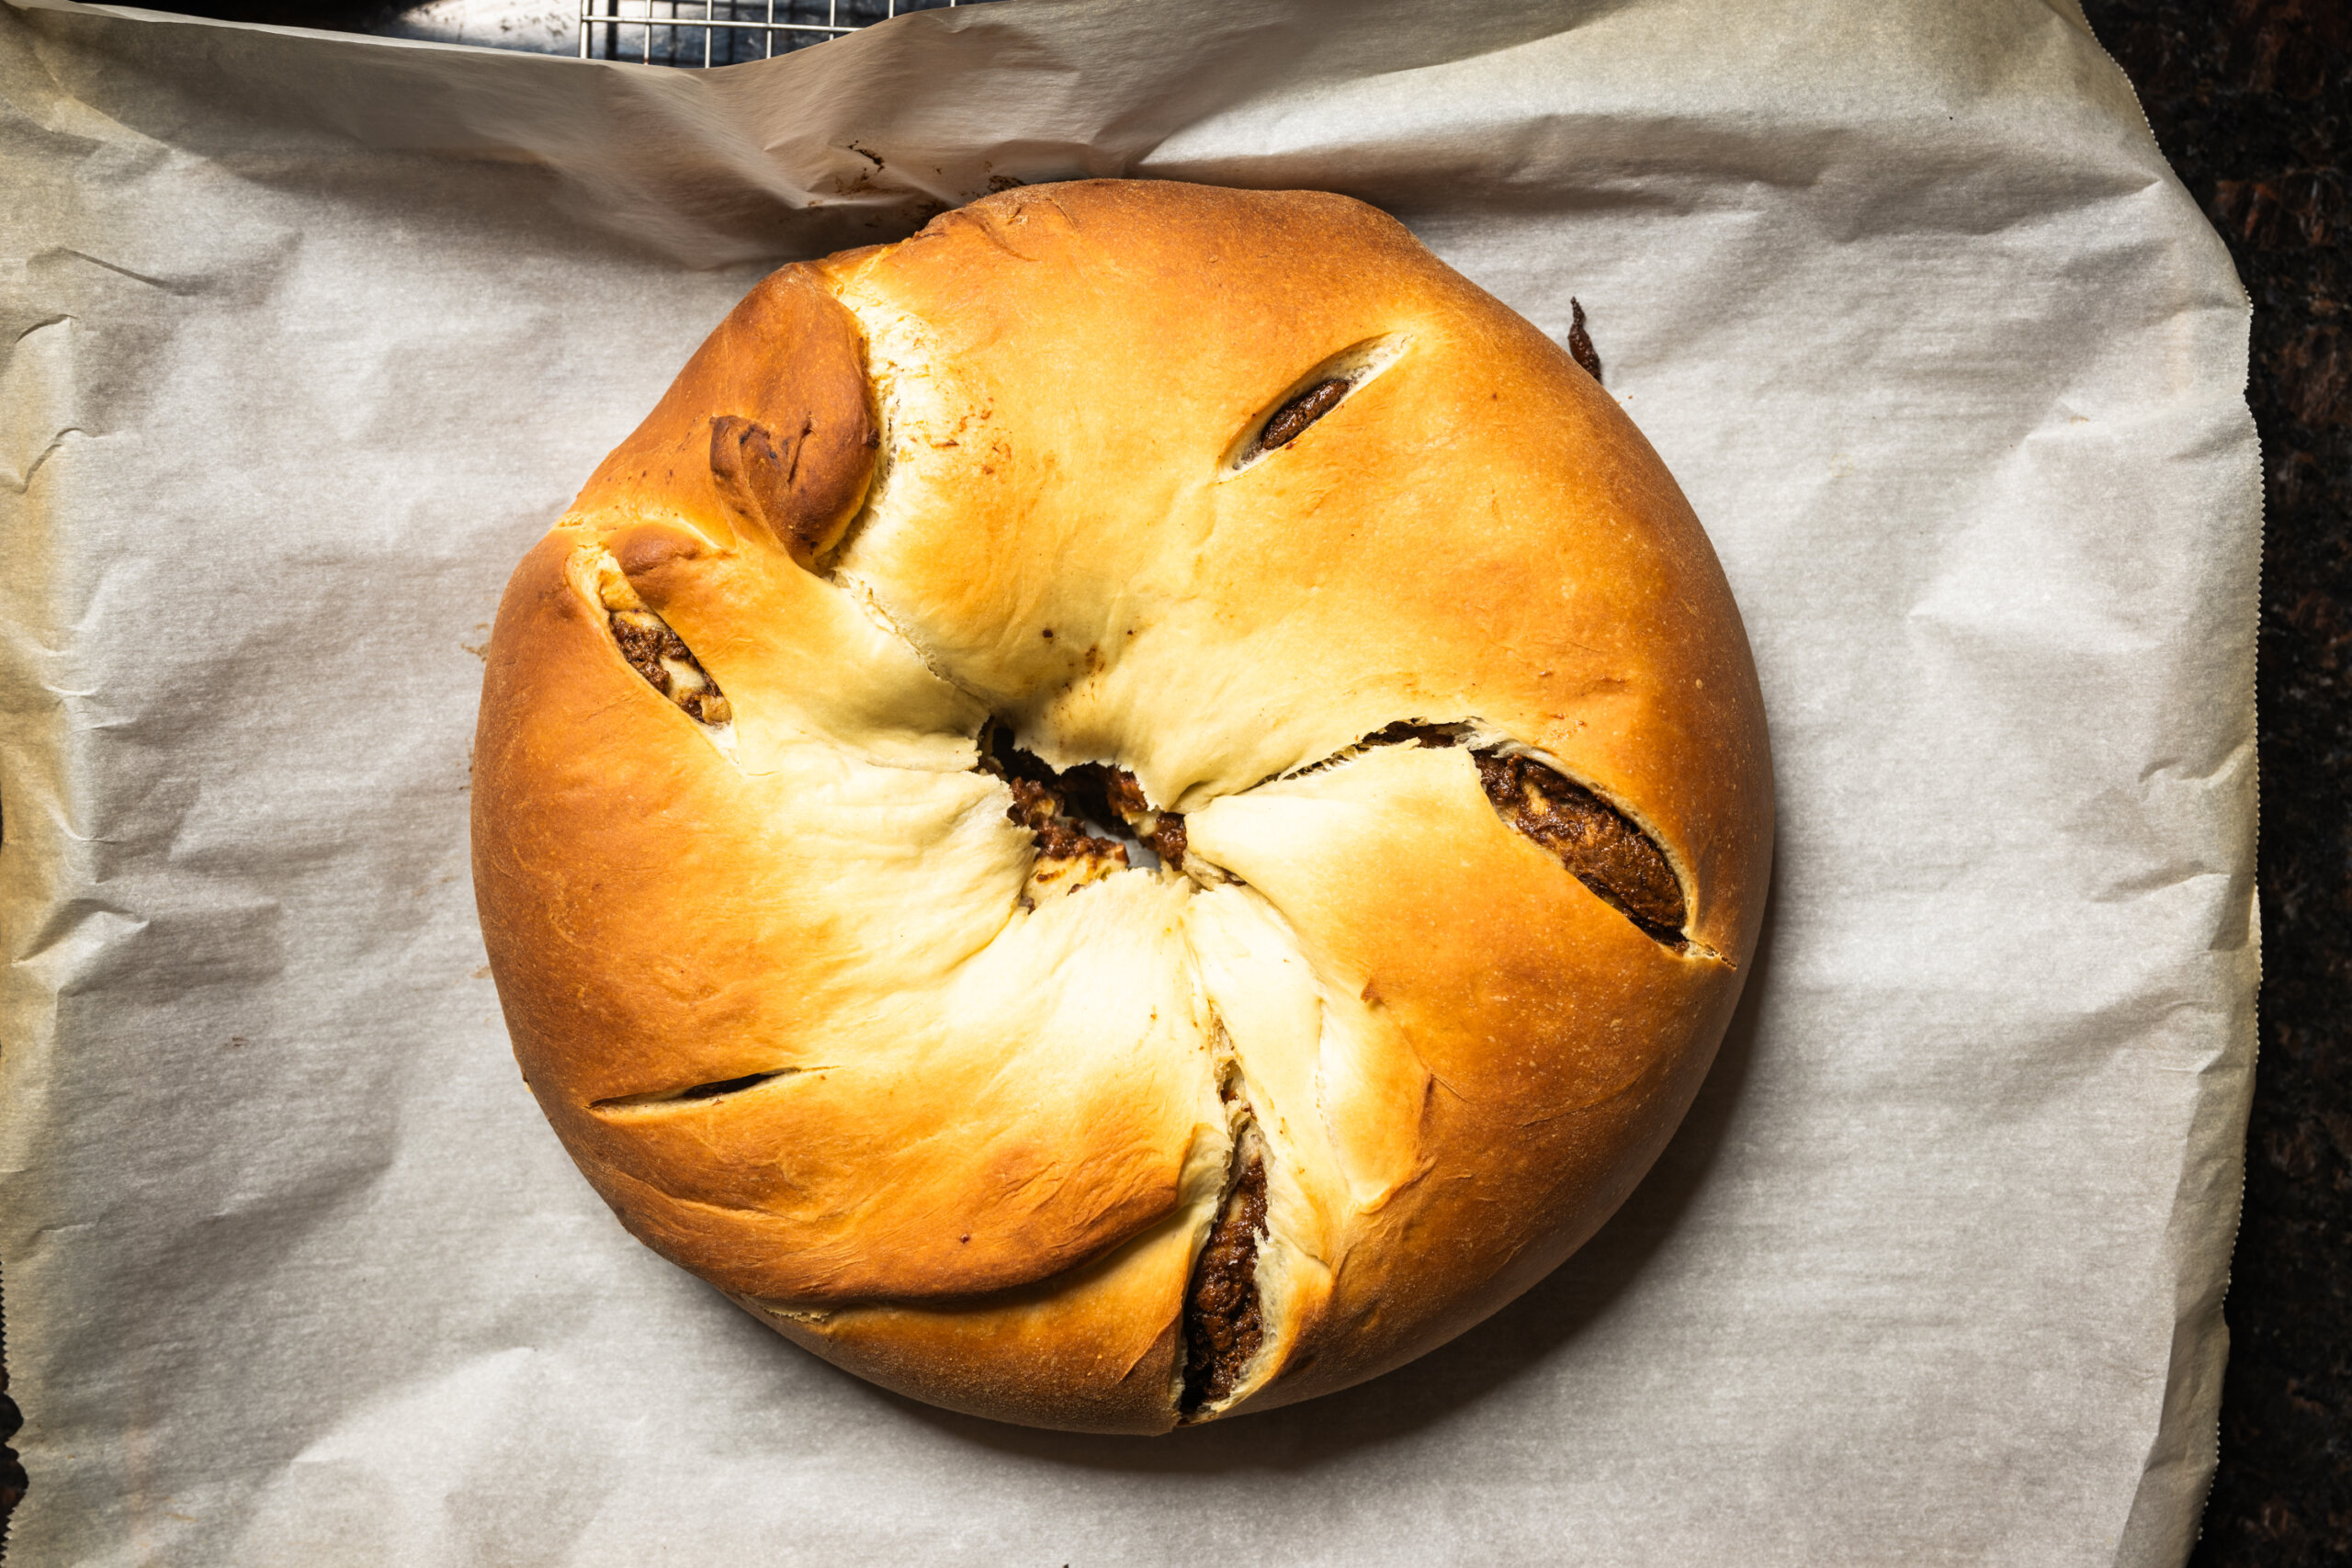 A baked king cake fresh out of the oven, ready for frosting